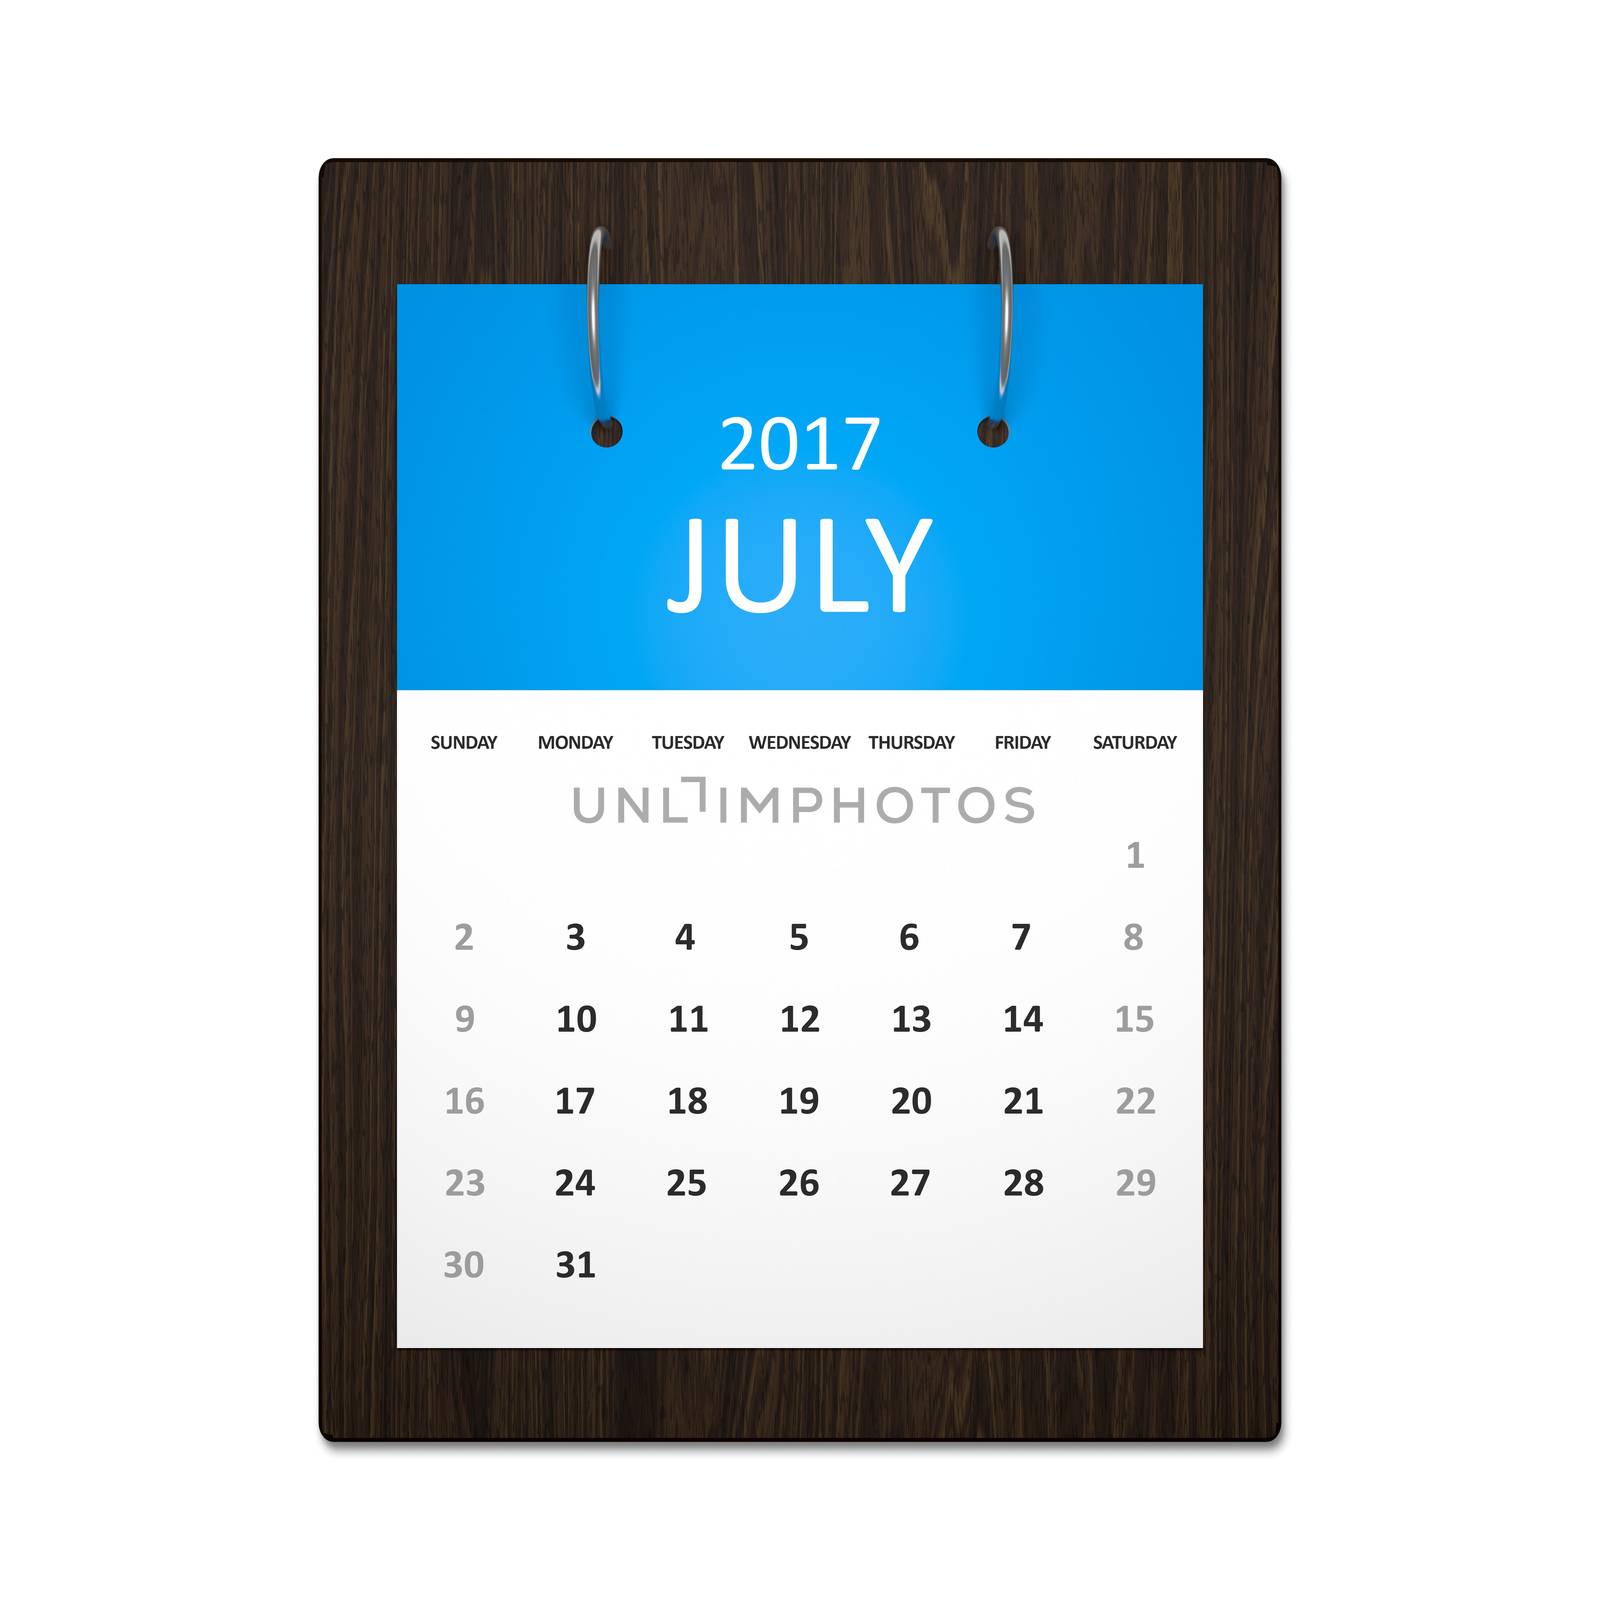 An image of a stylish calendar for event planning 2017 july